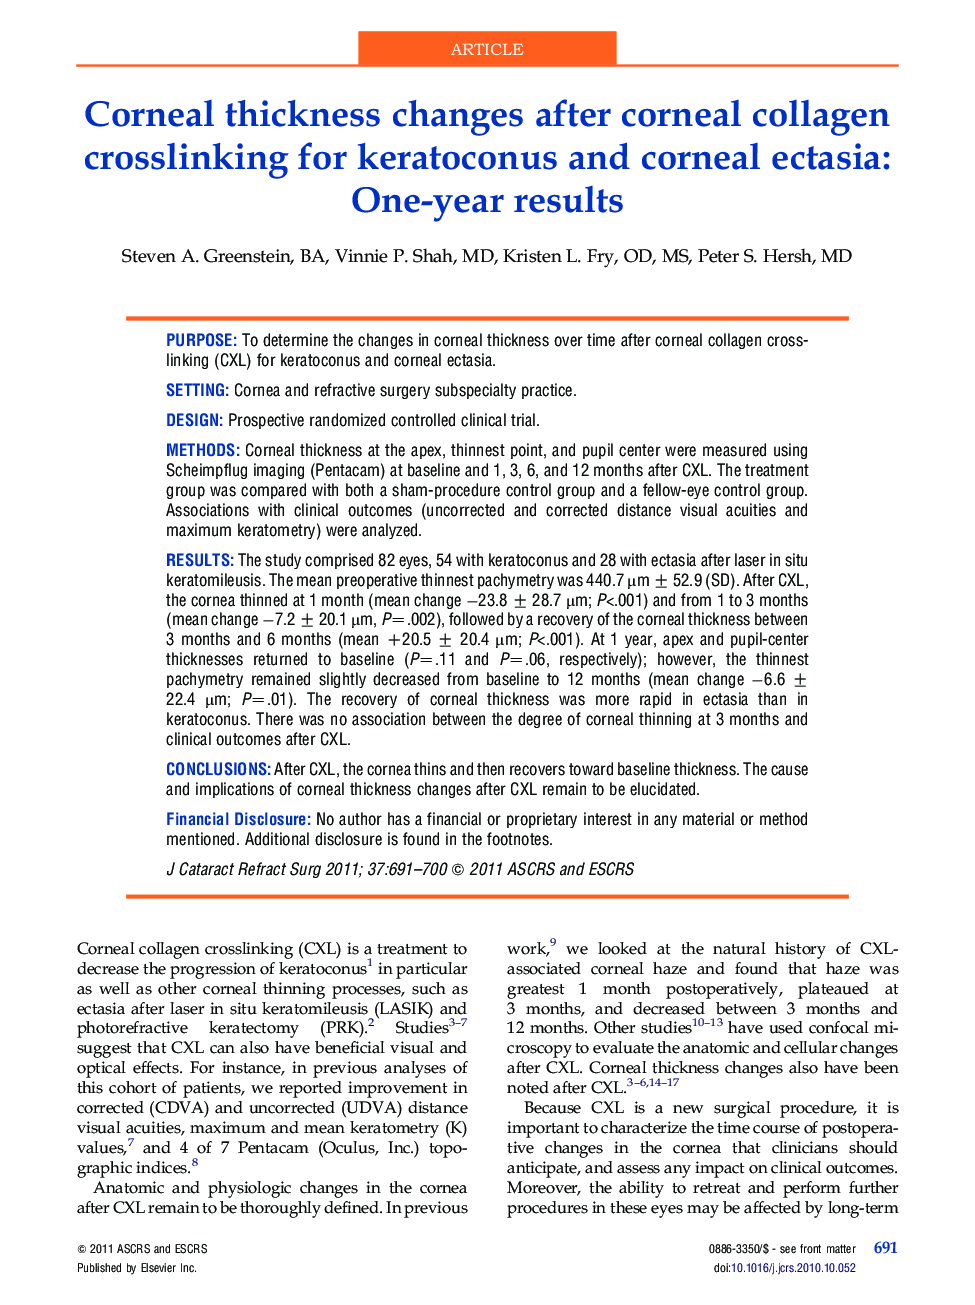 Corneal thickness changes after corneal collagen crosslinking for keratoconus and corneal ectasia: One-year results